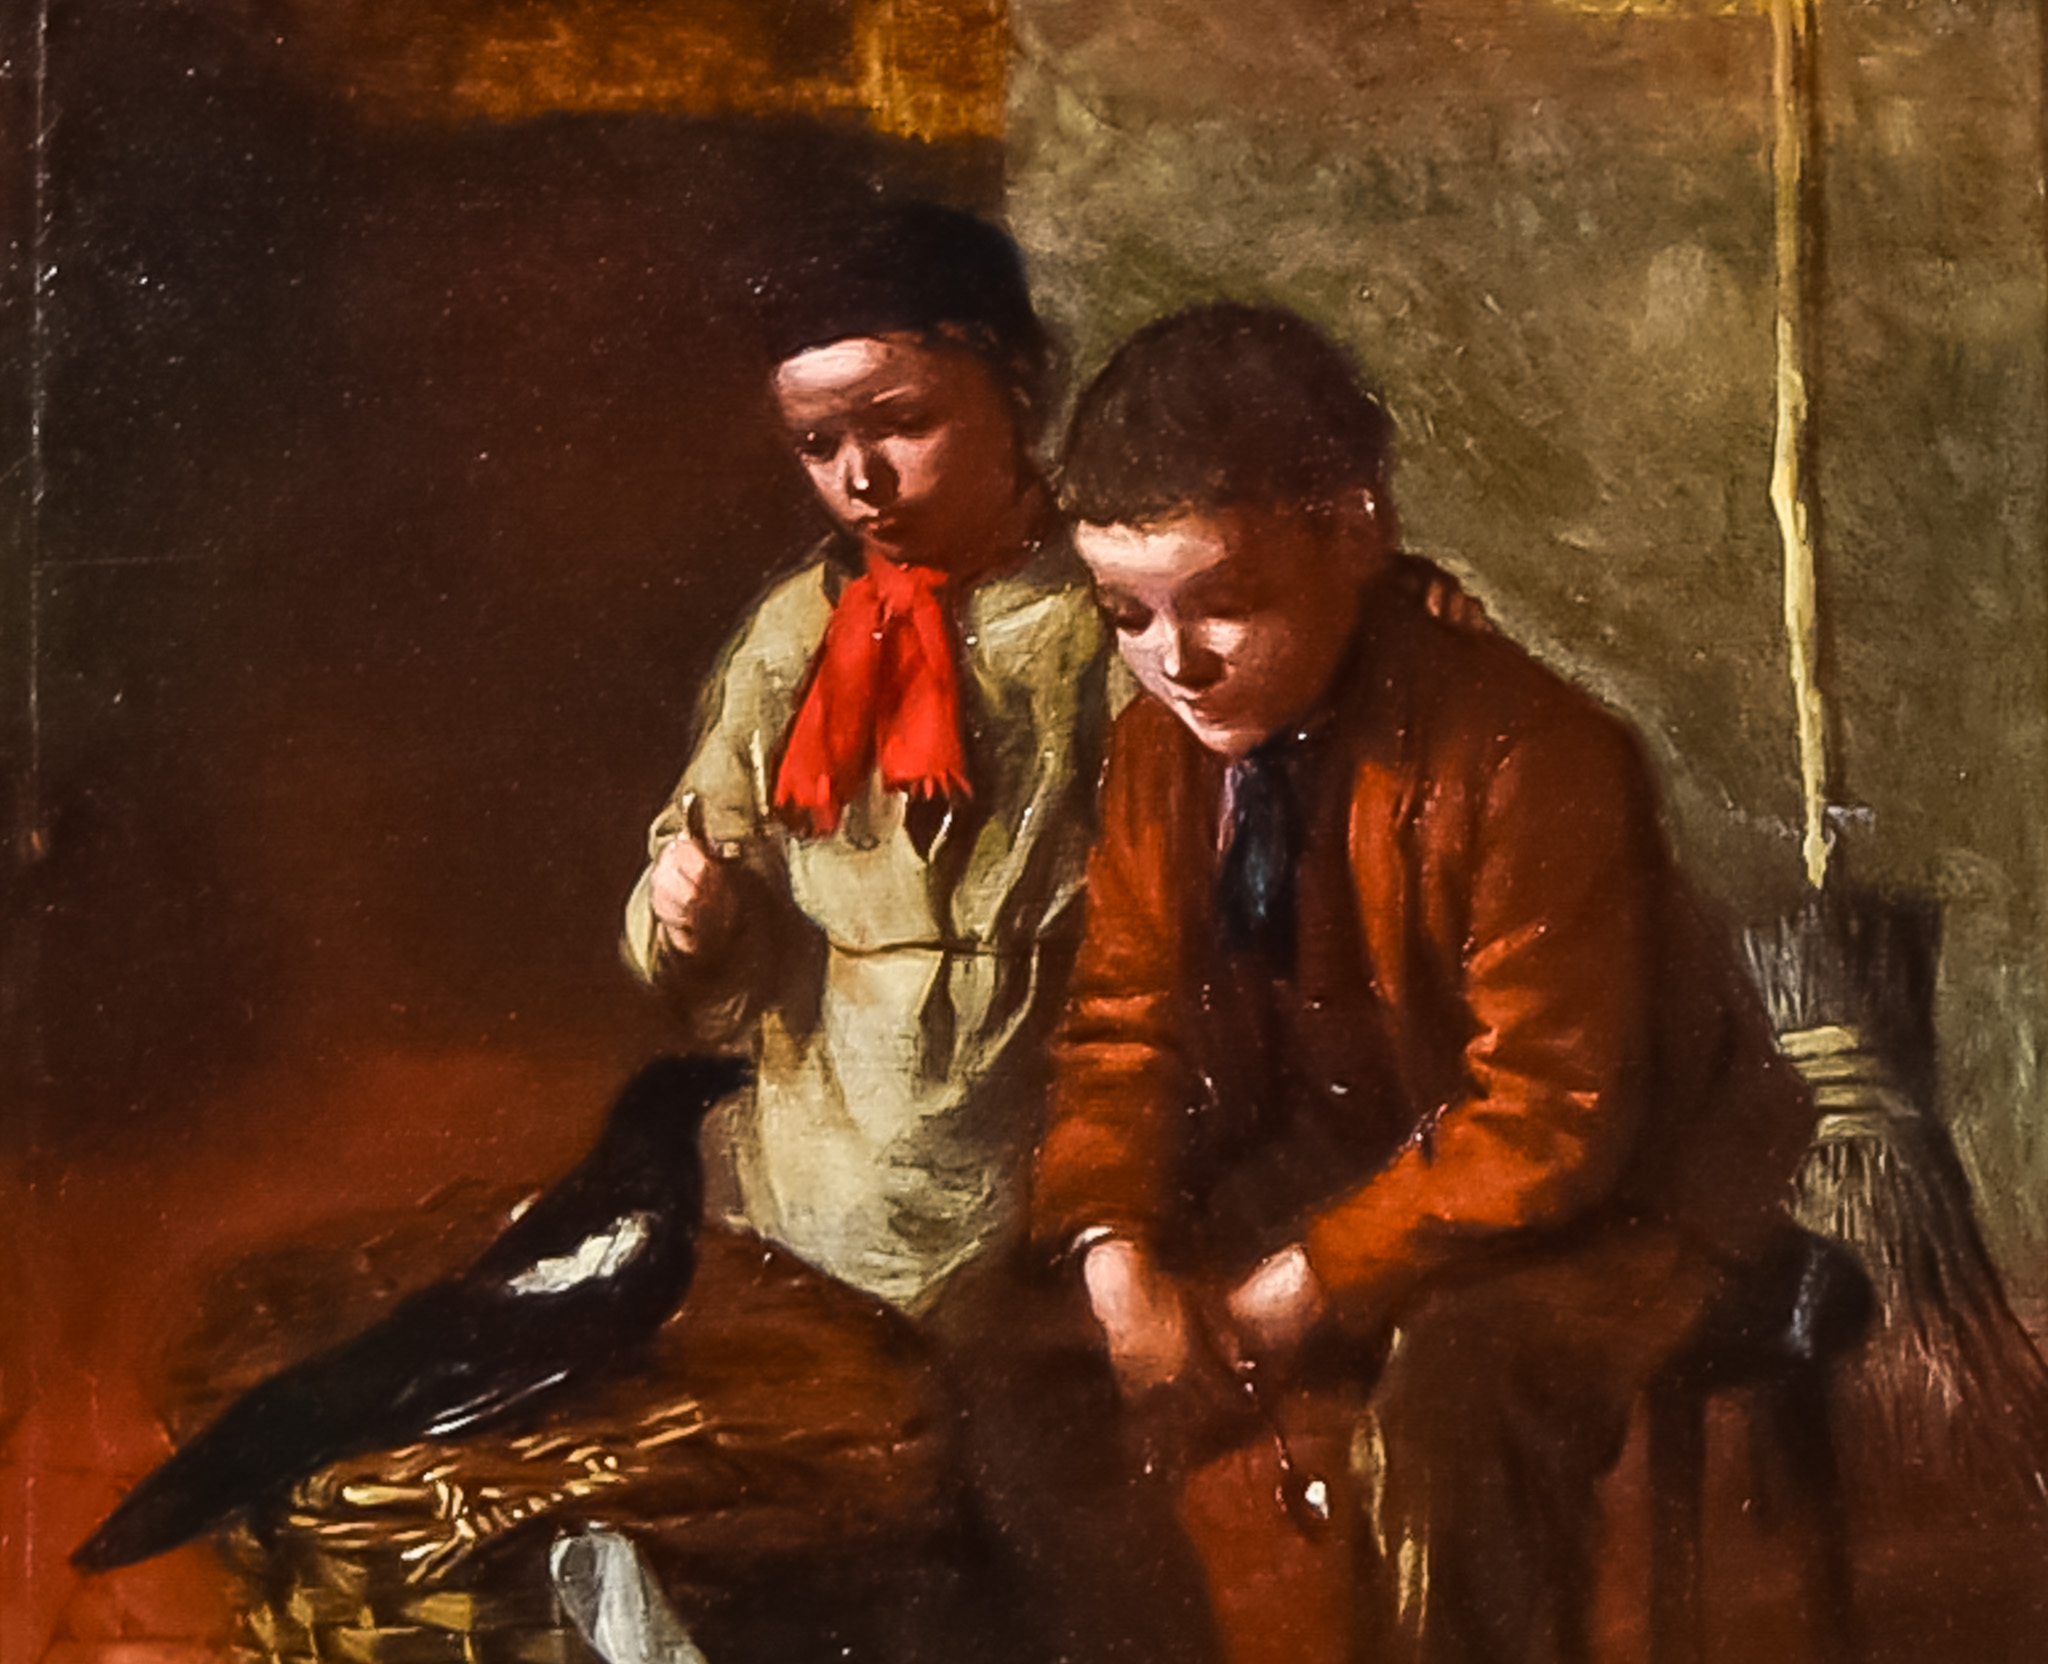 William Hemsley (1819-1893) - Oil painting - "The Culprits" - interior scene with two boys and a